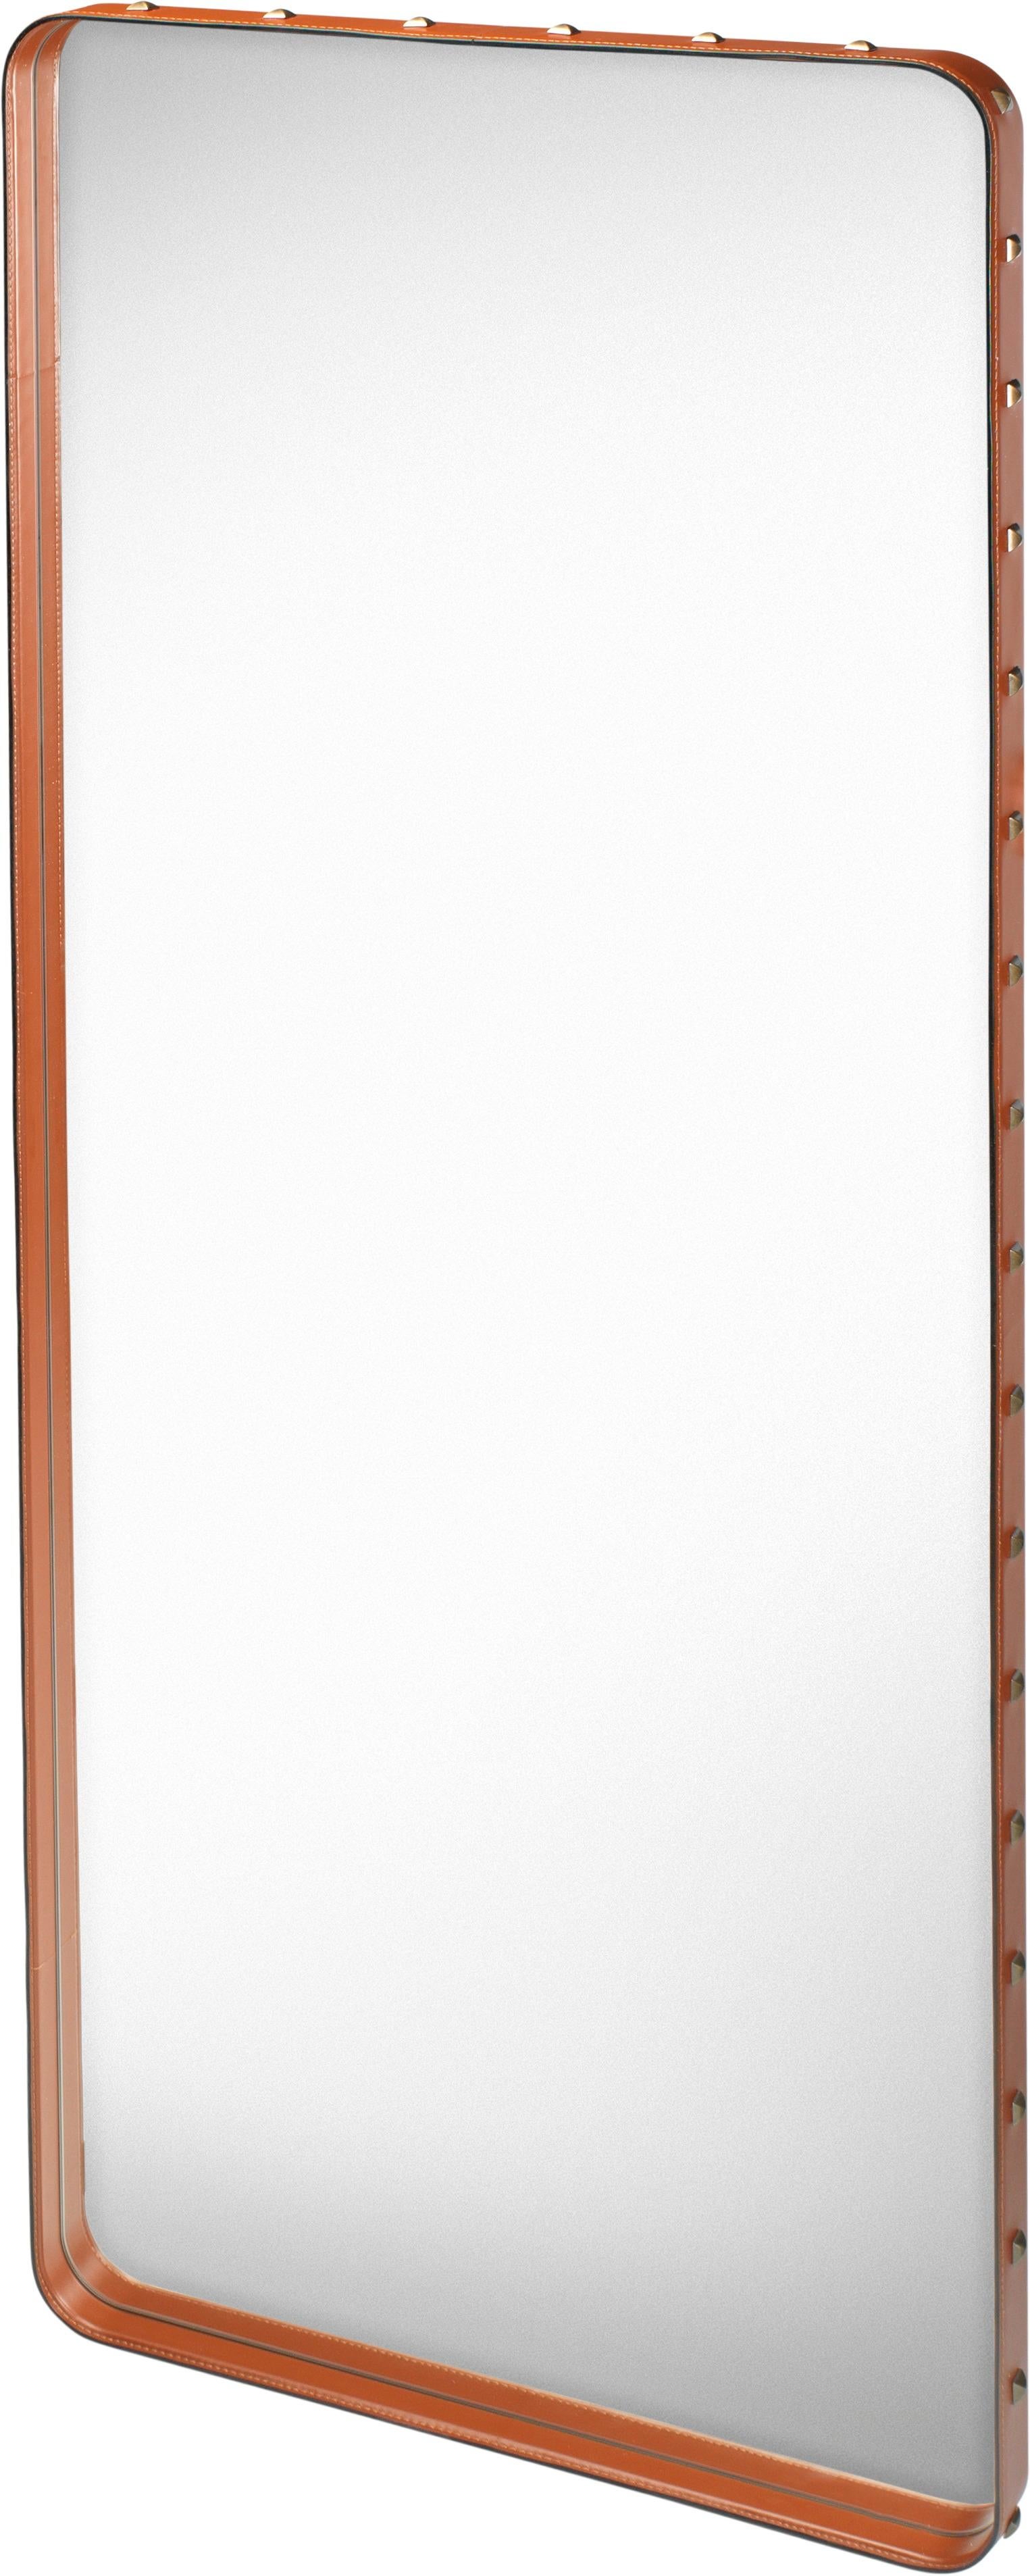 Small Jacques Adnet 'Rectangulaire' Wall Mirror in Tan Leather for GUBI 4